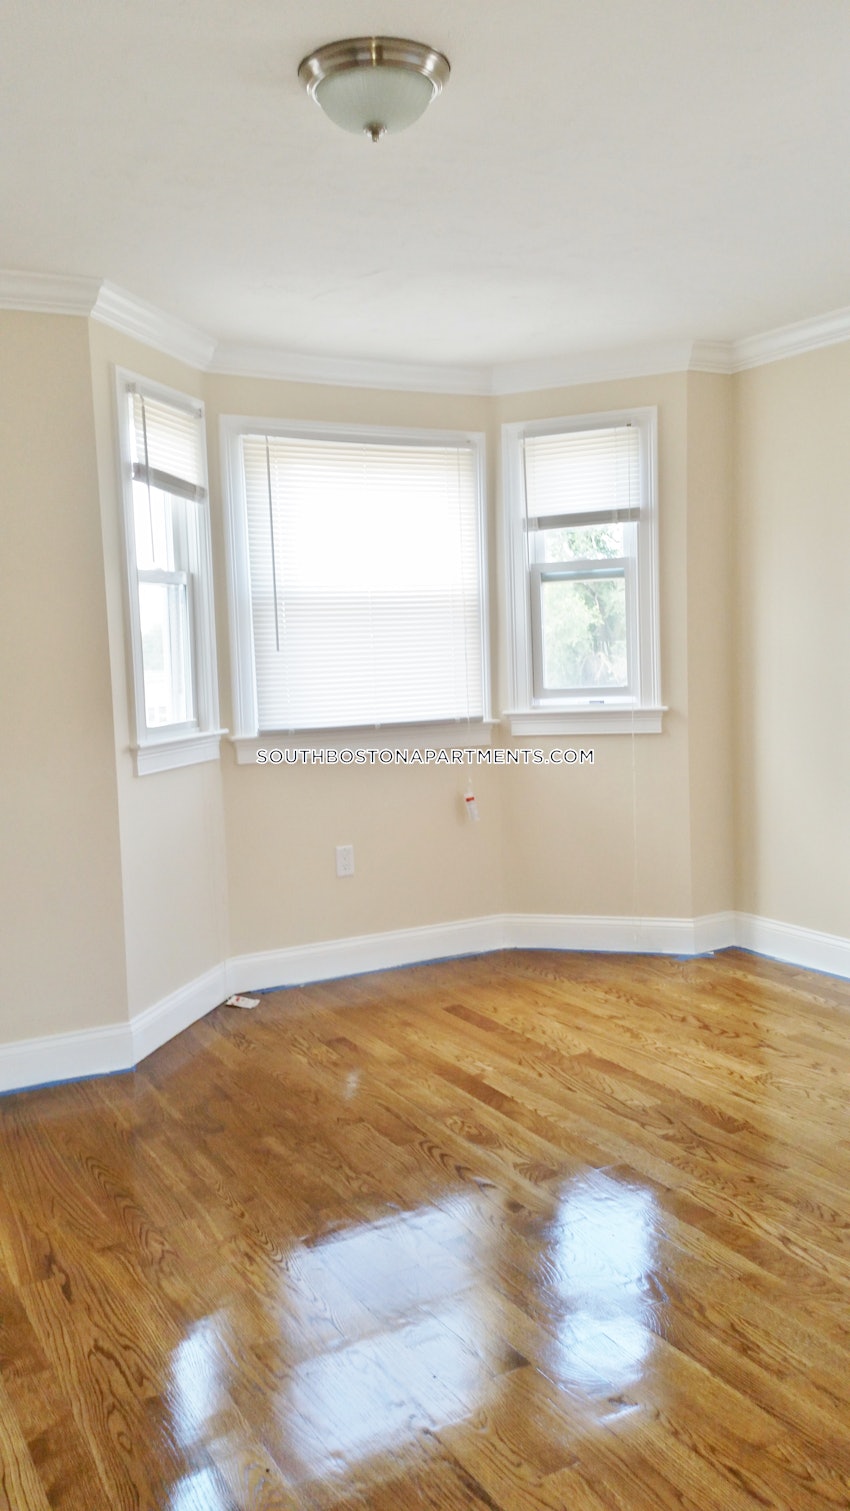 BOSTON - SOUTH BOSTON - ANDREW SQUARE - 4 Beds, 1.5 Baths - Image 24